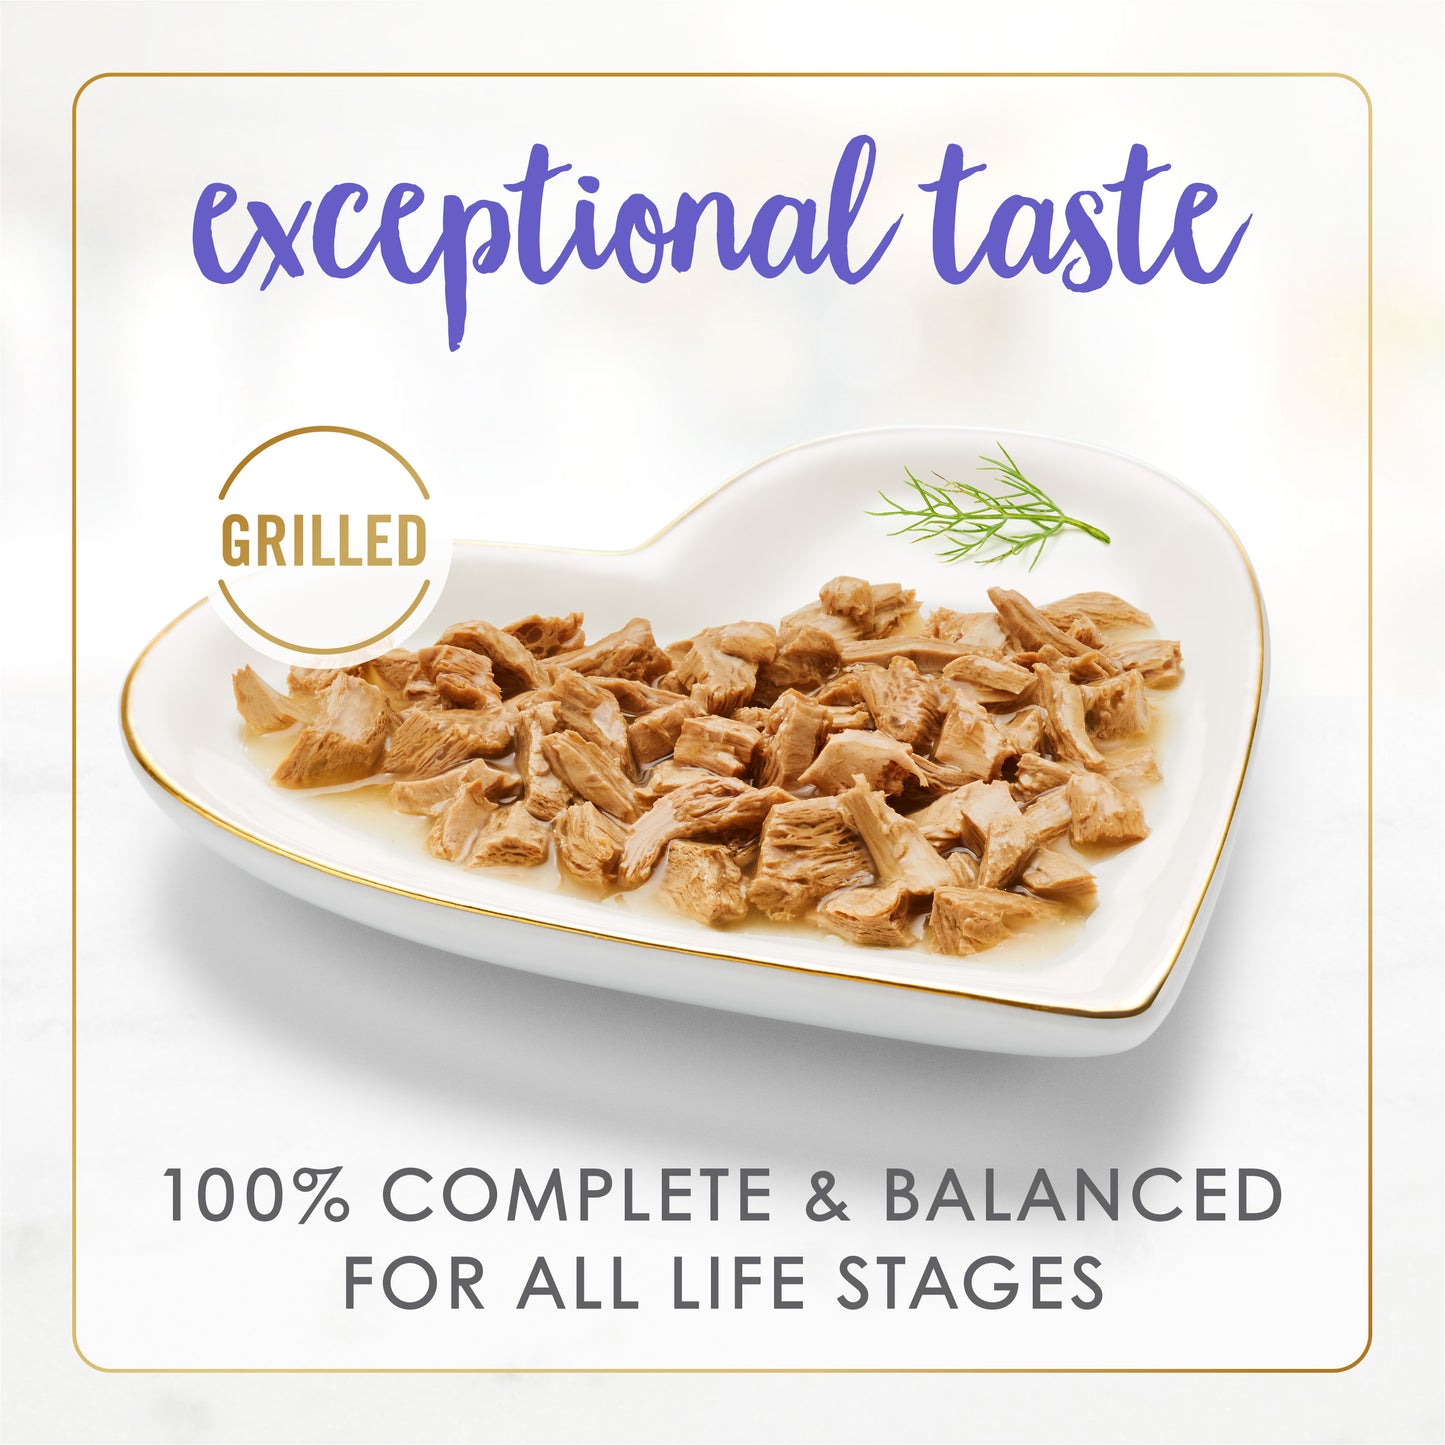 Exceptional taste, 100% complete and balanced for all life stages.